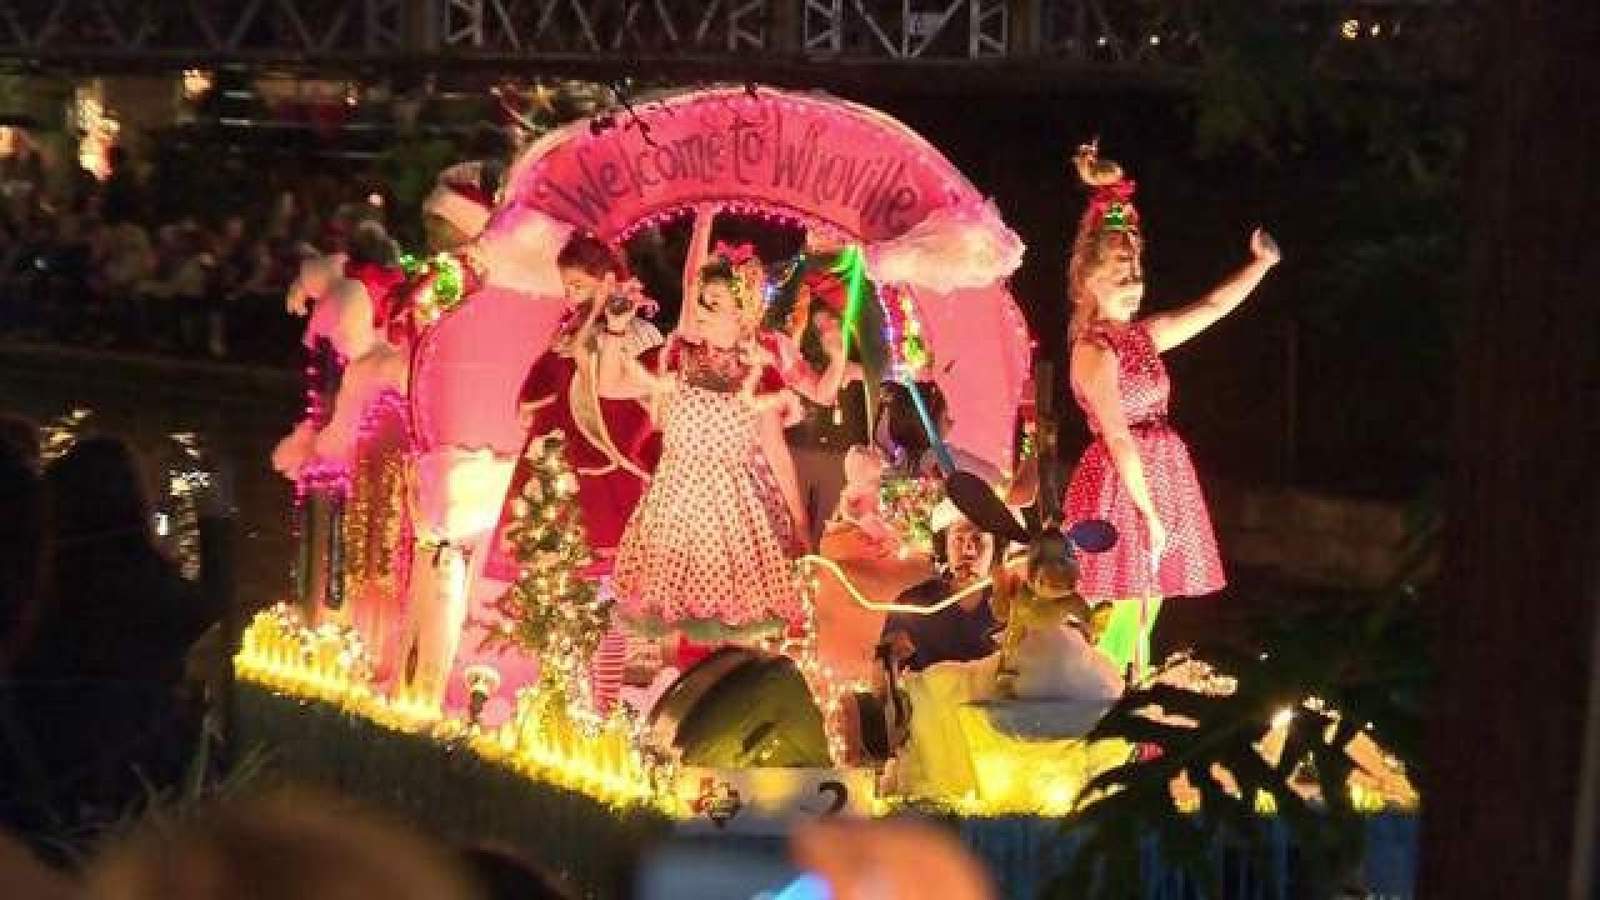 2020 Ford Holiday River Parade canceled due to COVID-19, virtual activities planned